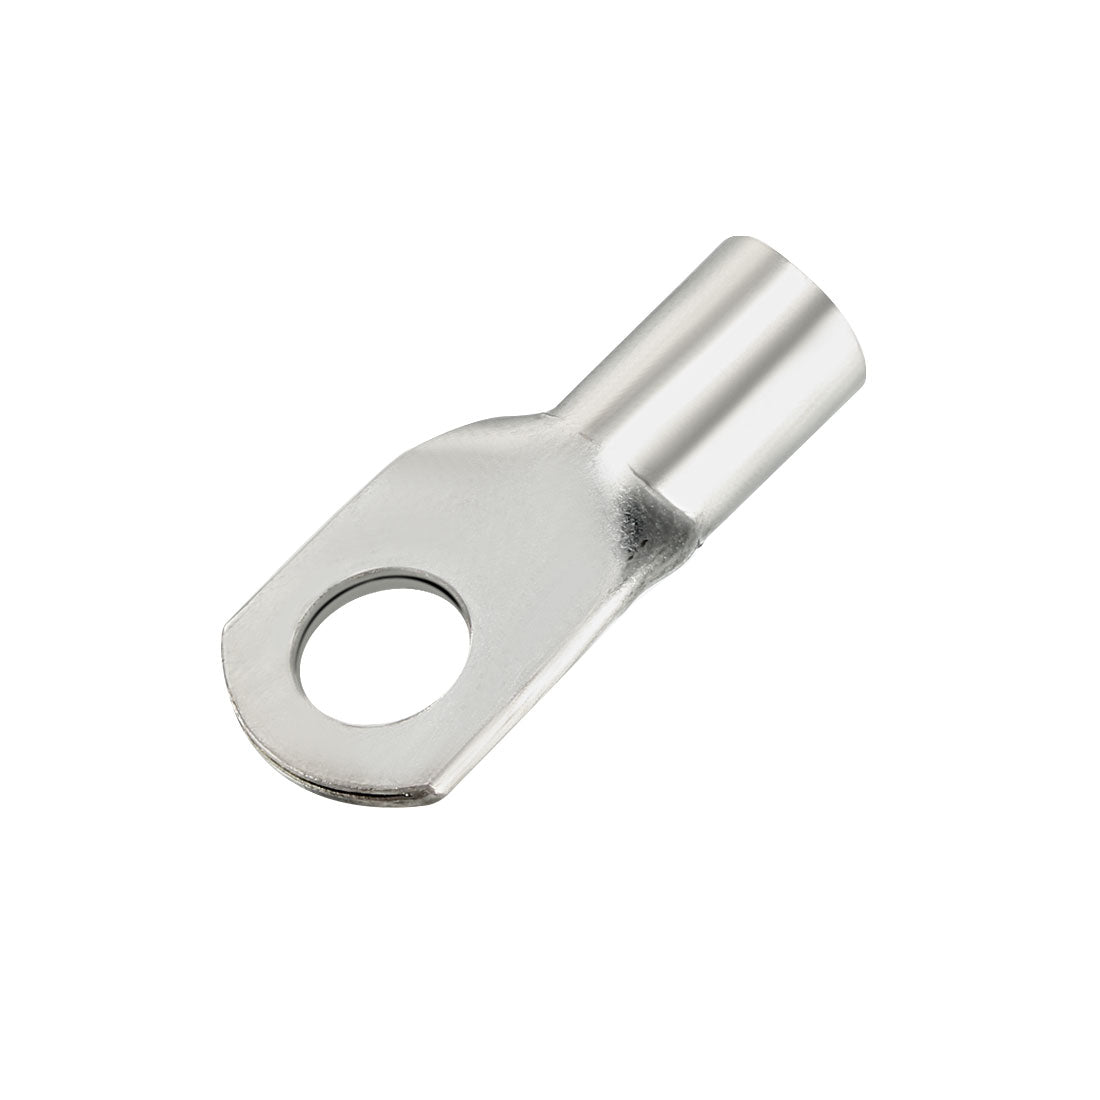 uxcell Uxcell 5Pcs SC50-10 Non-Insulated U-Type Copper Crimp Terminals 10mm Wire Connector Silver Tone